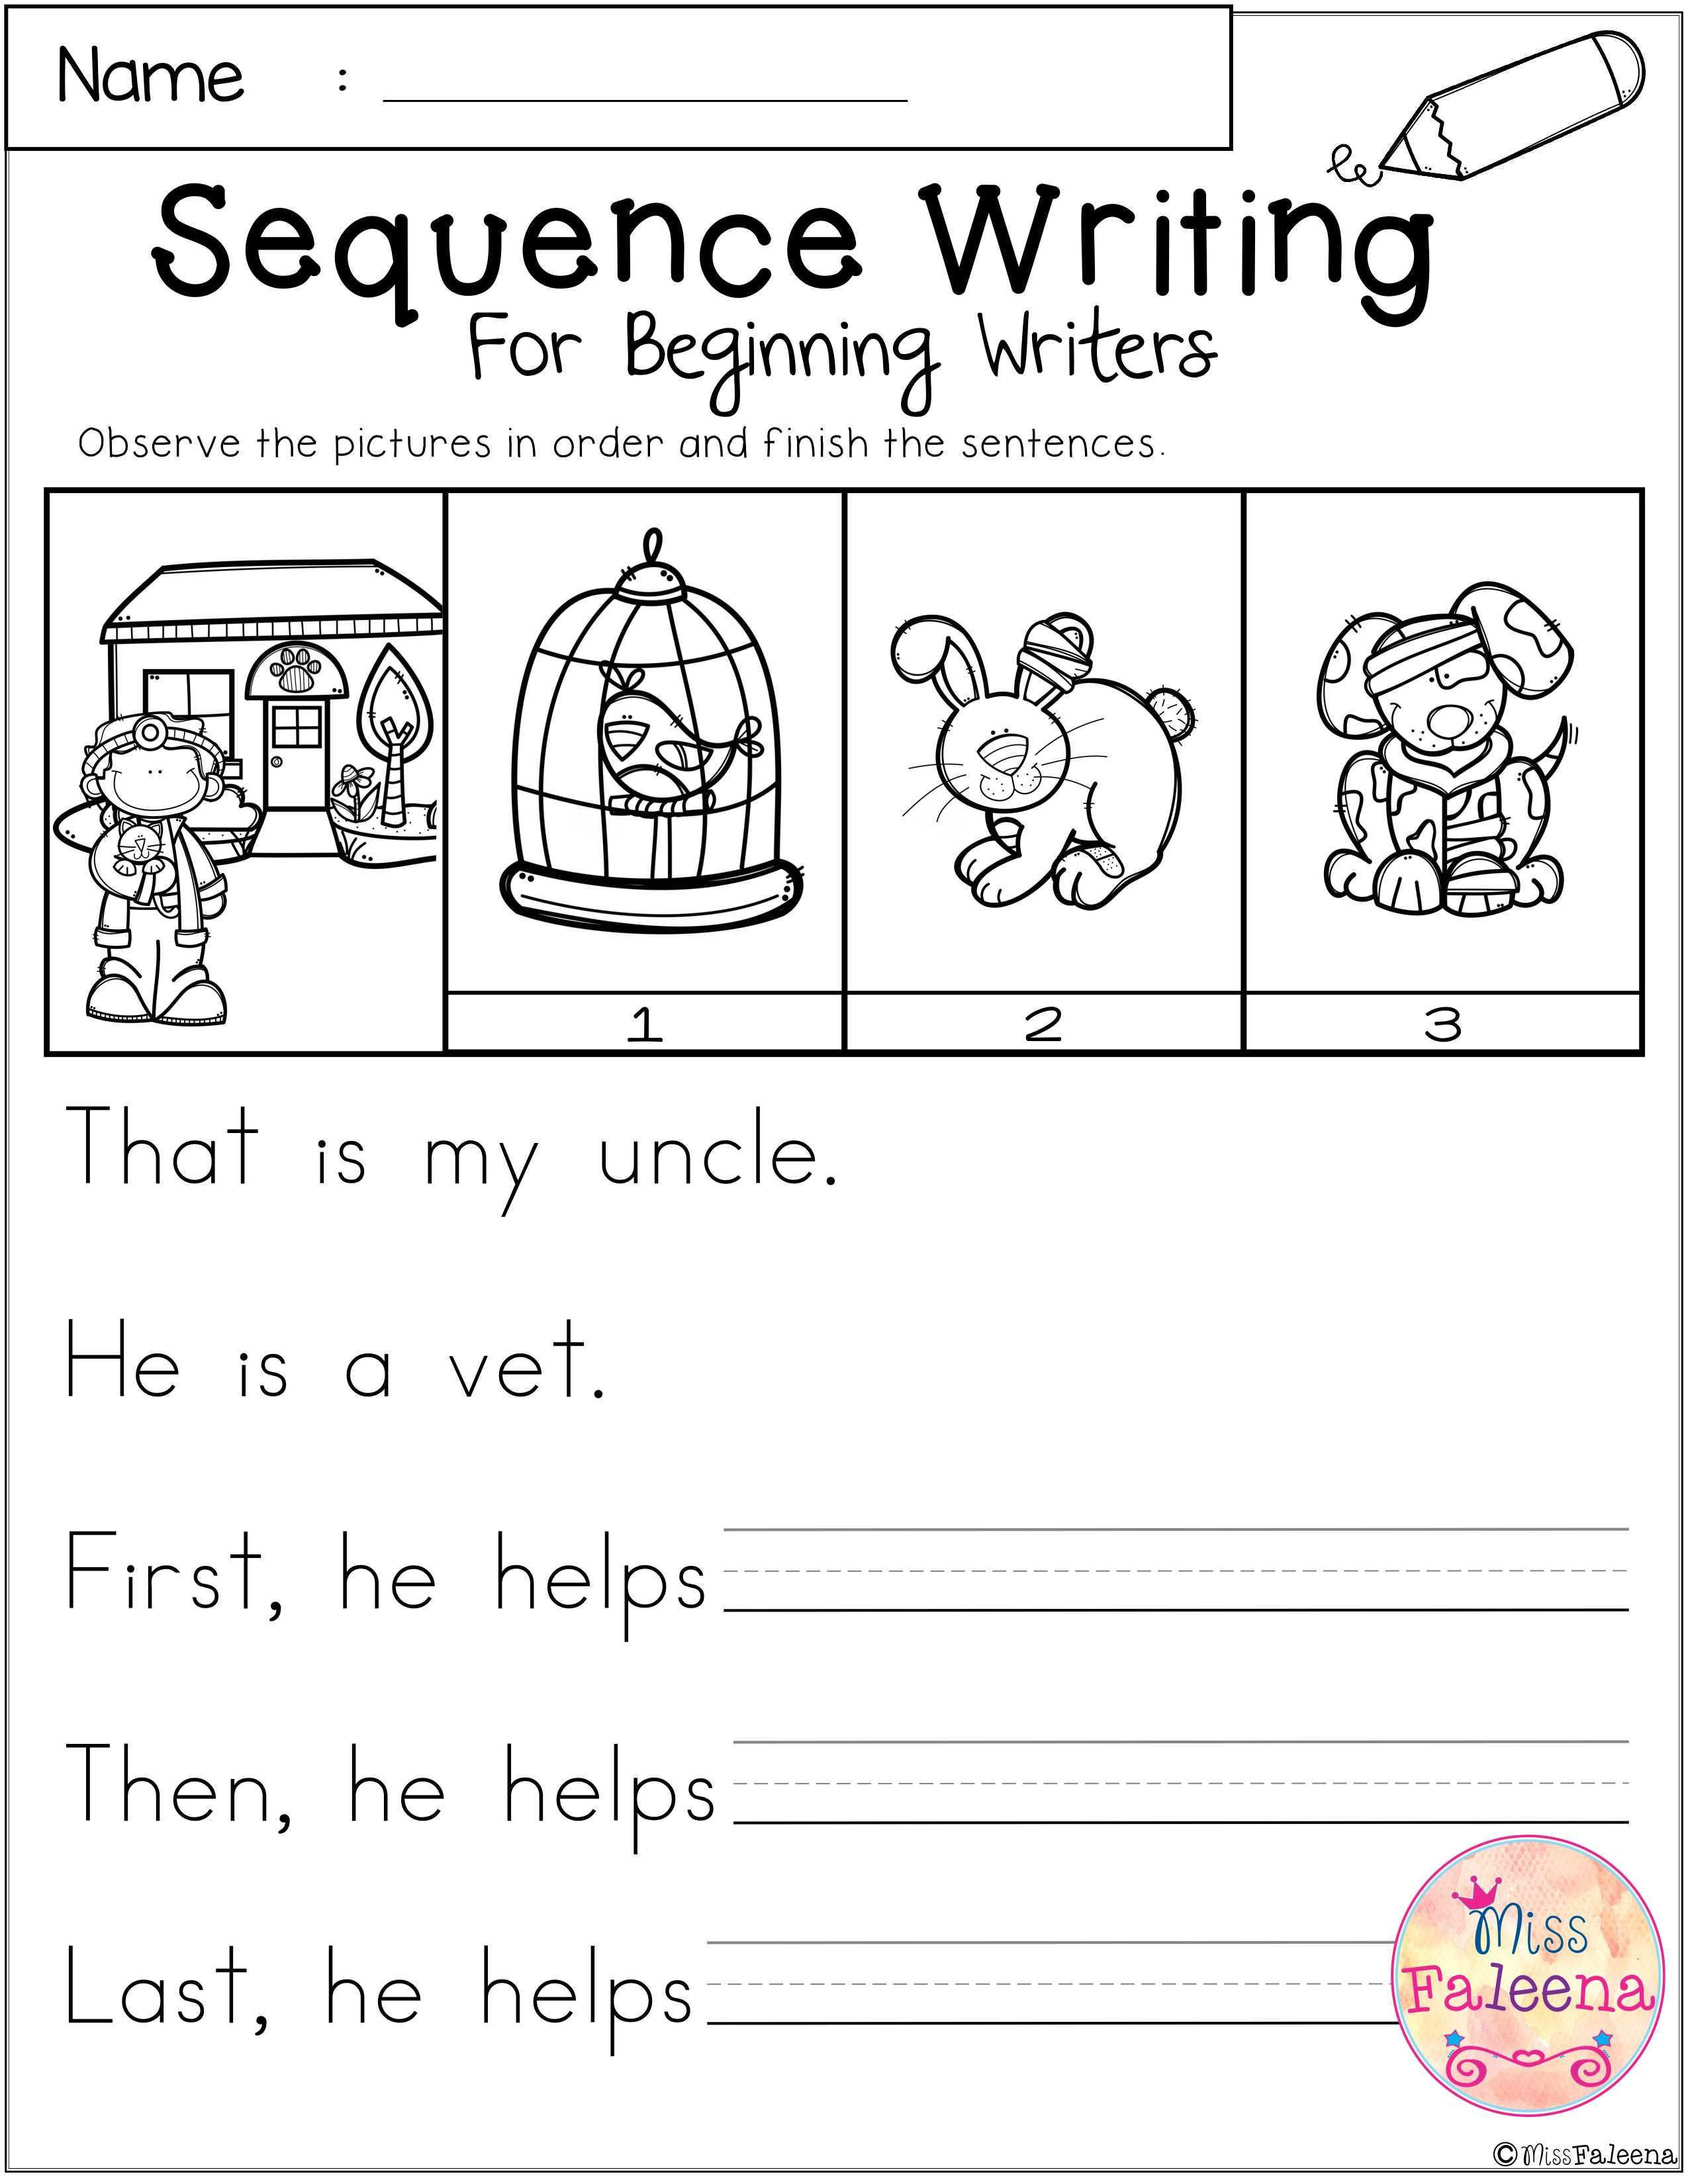 Free Printable Sequencing Worksheets Free Sequence Writing for Beginning Writers